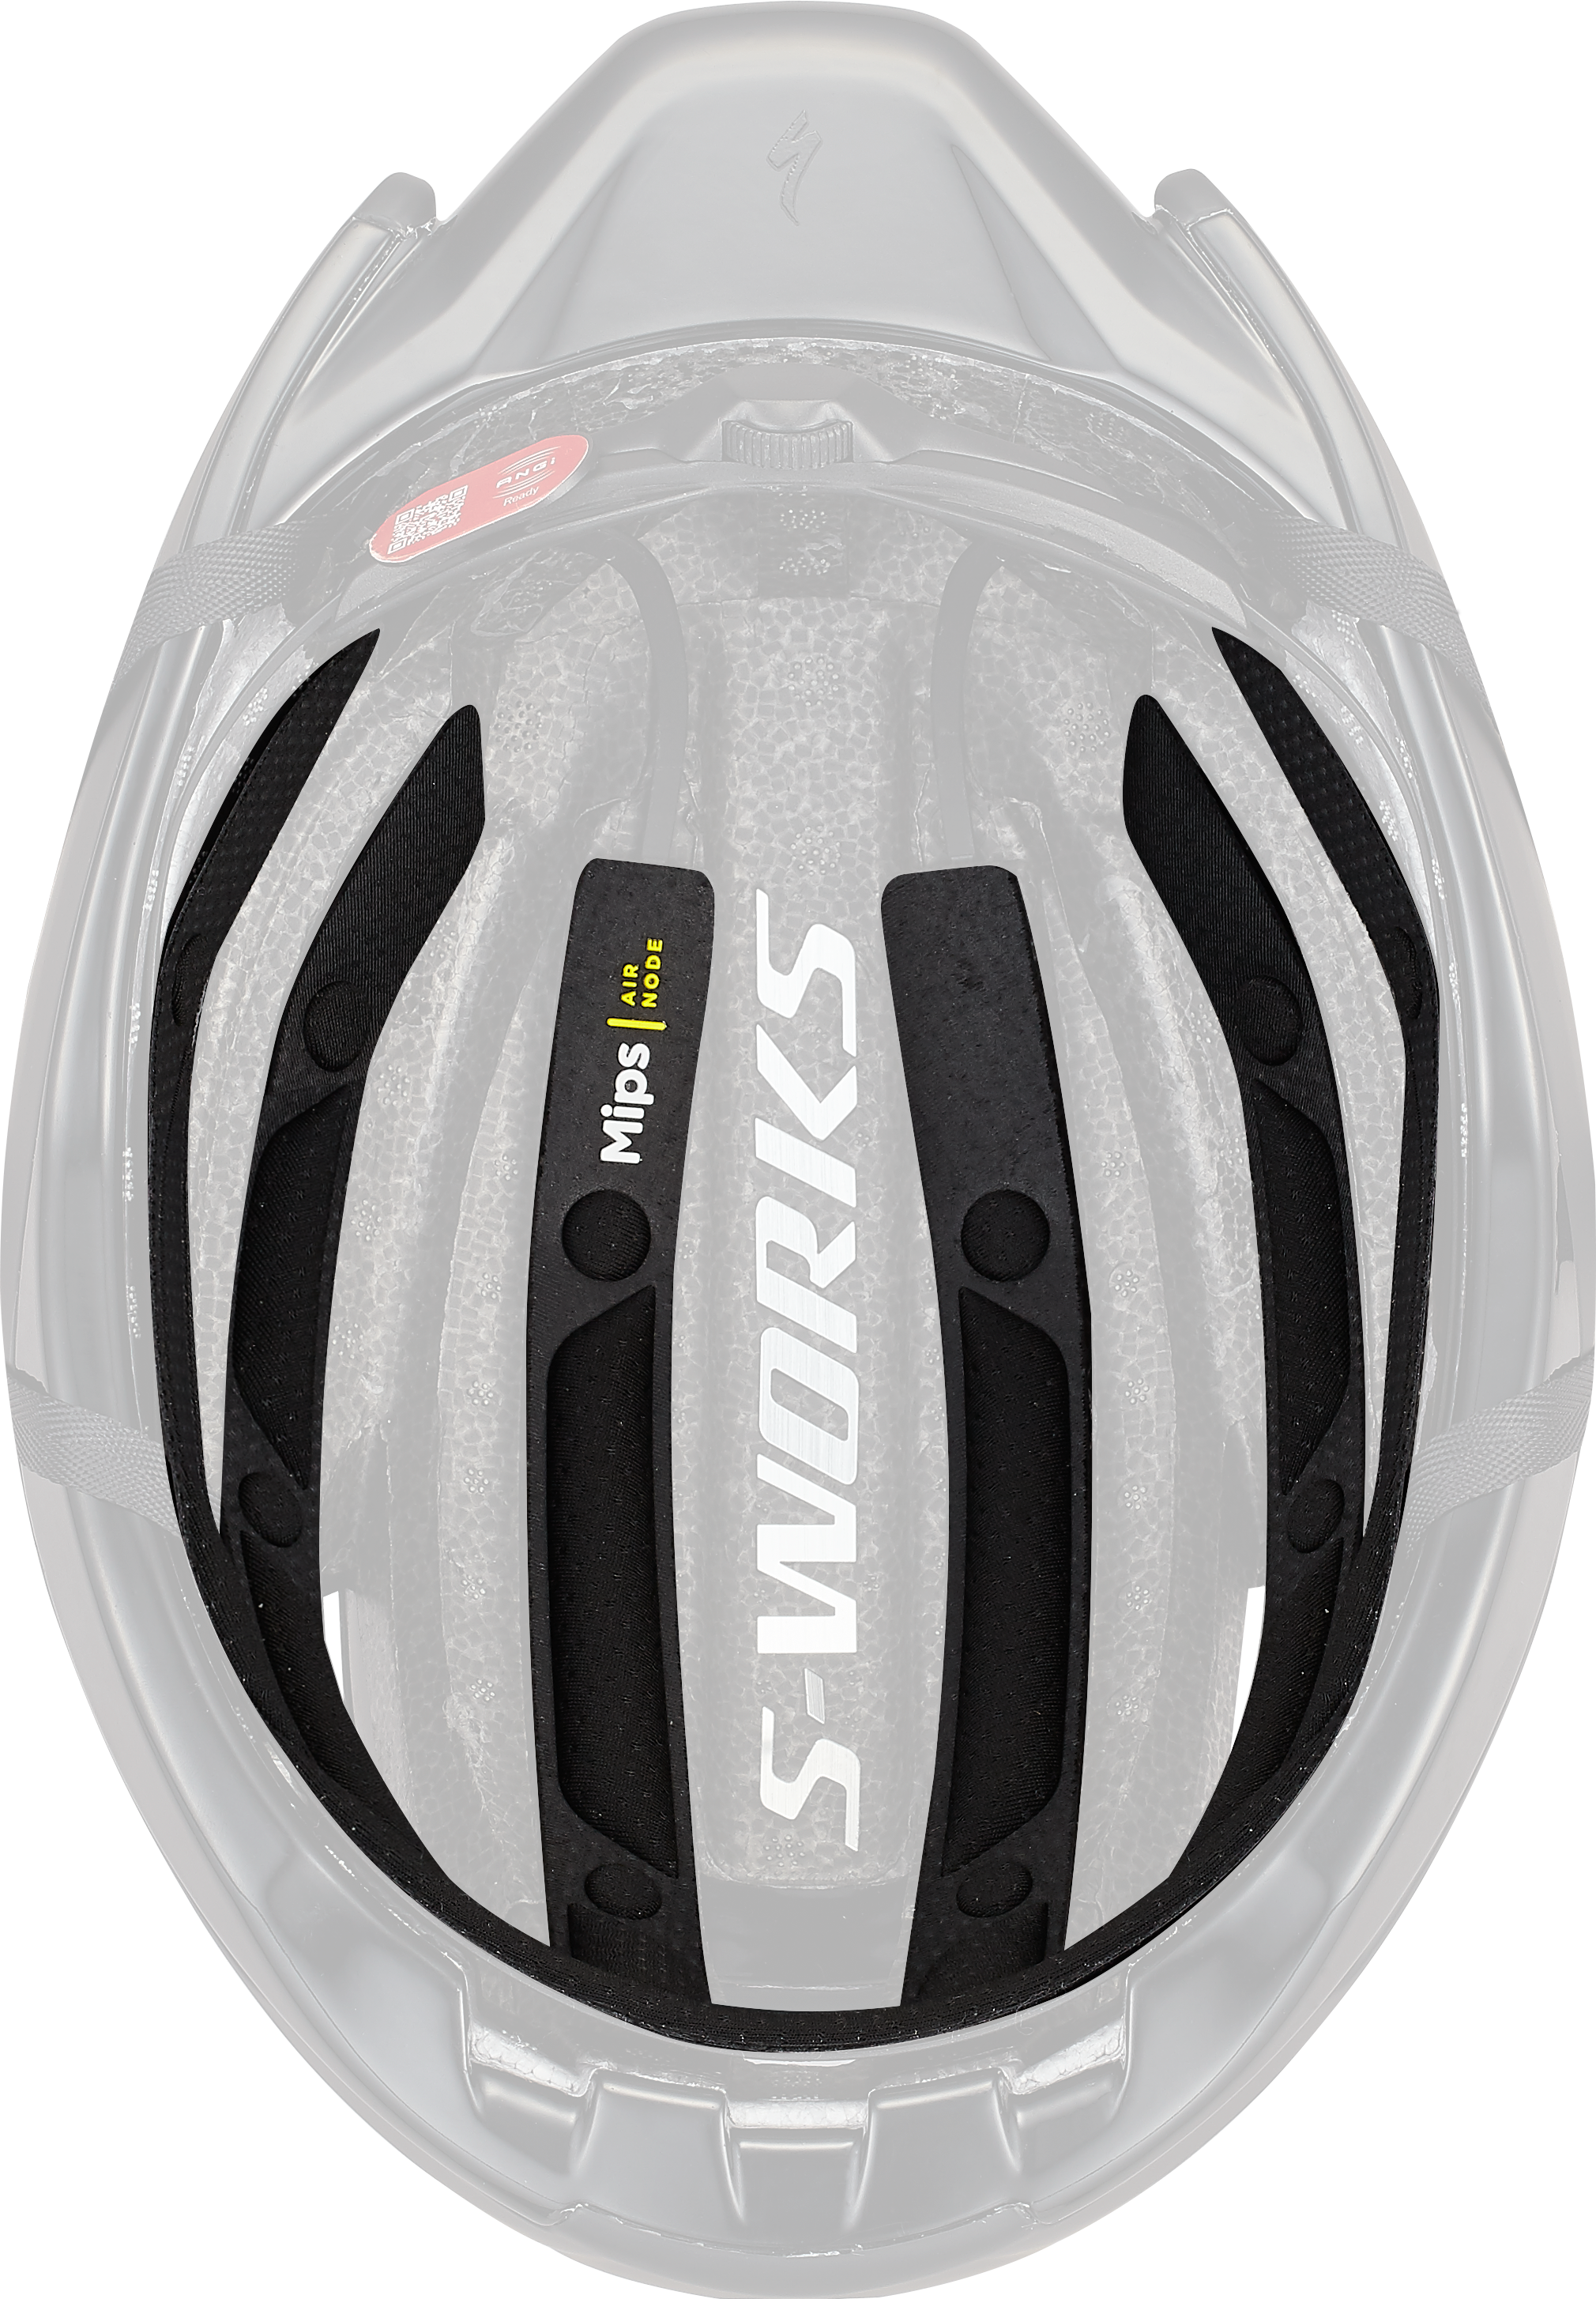 S-WORKS EVADE 3 REPLACEMENT PADSET S(S ブラック): ヘルメット 